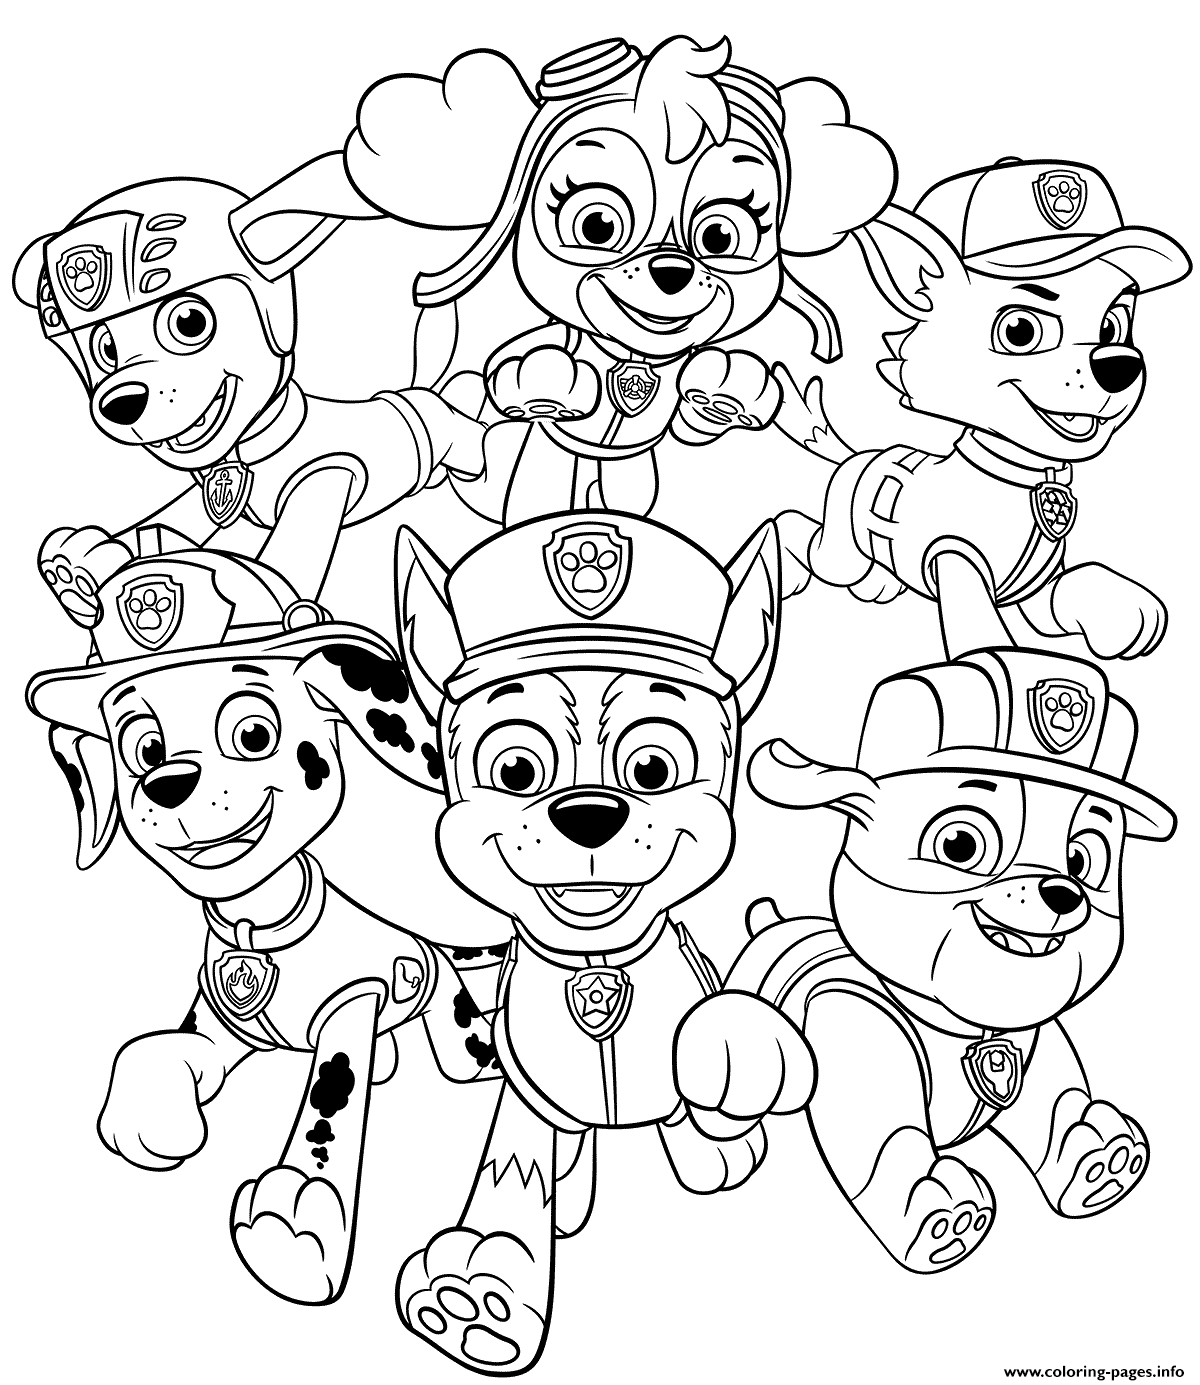 Print all paw patrol pups coloring pages paw patrol coloring paw patrol coloring pages paw patrol printables